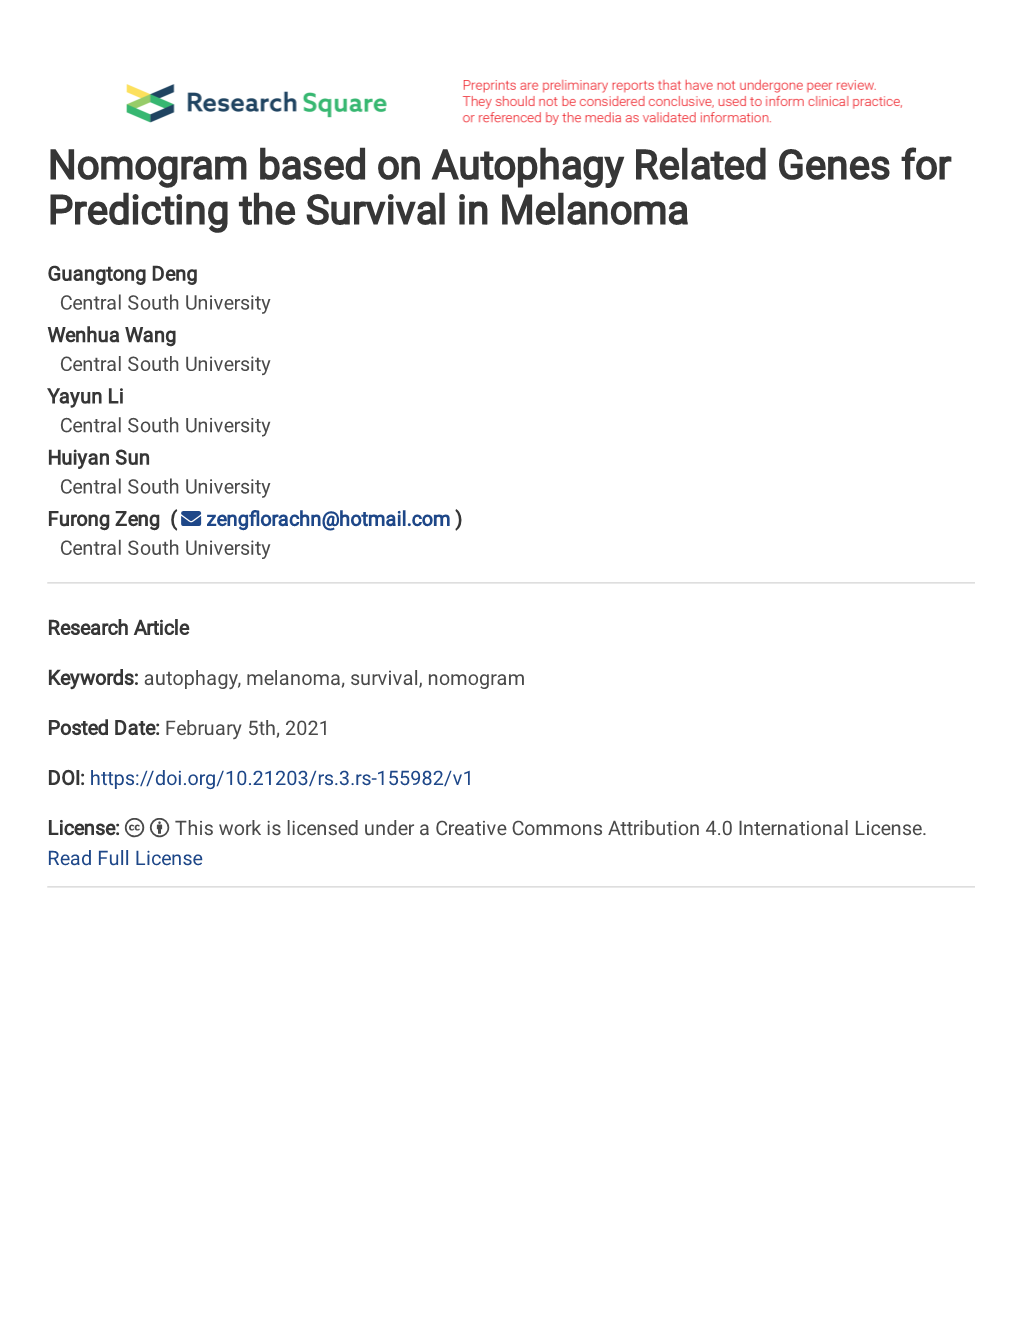 Nomogram Based on Autophagy Related Genes for Predicting the Survival in Melanoma